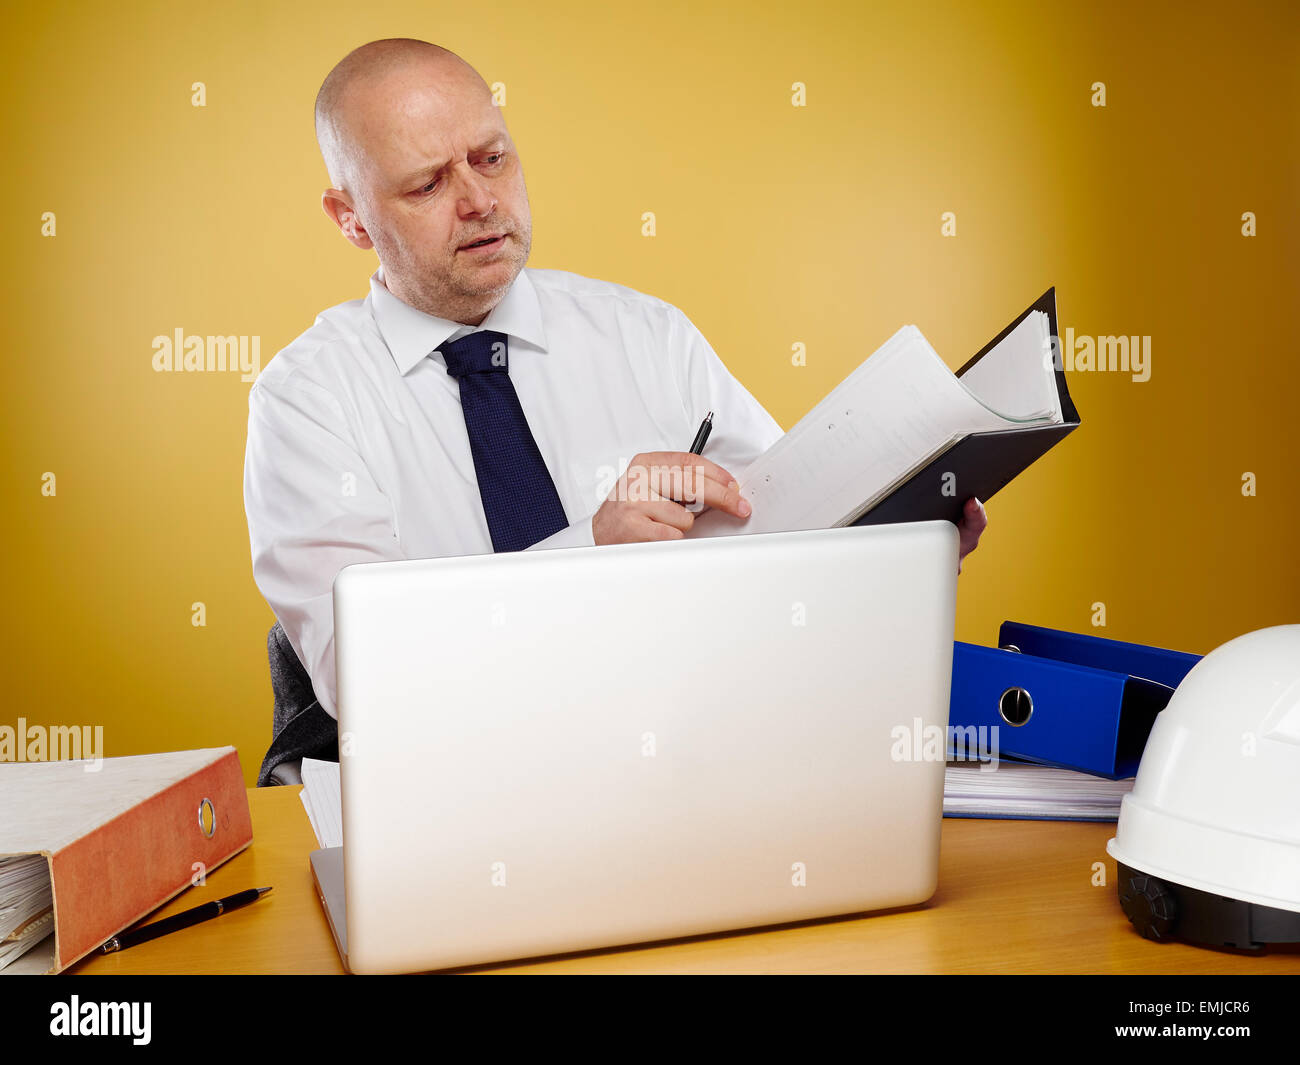 Hardworking male engineer in office, he wearing a white shirt and tie, the laptop, binders and white hard hat is on the table Stock Photo